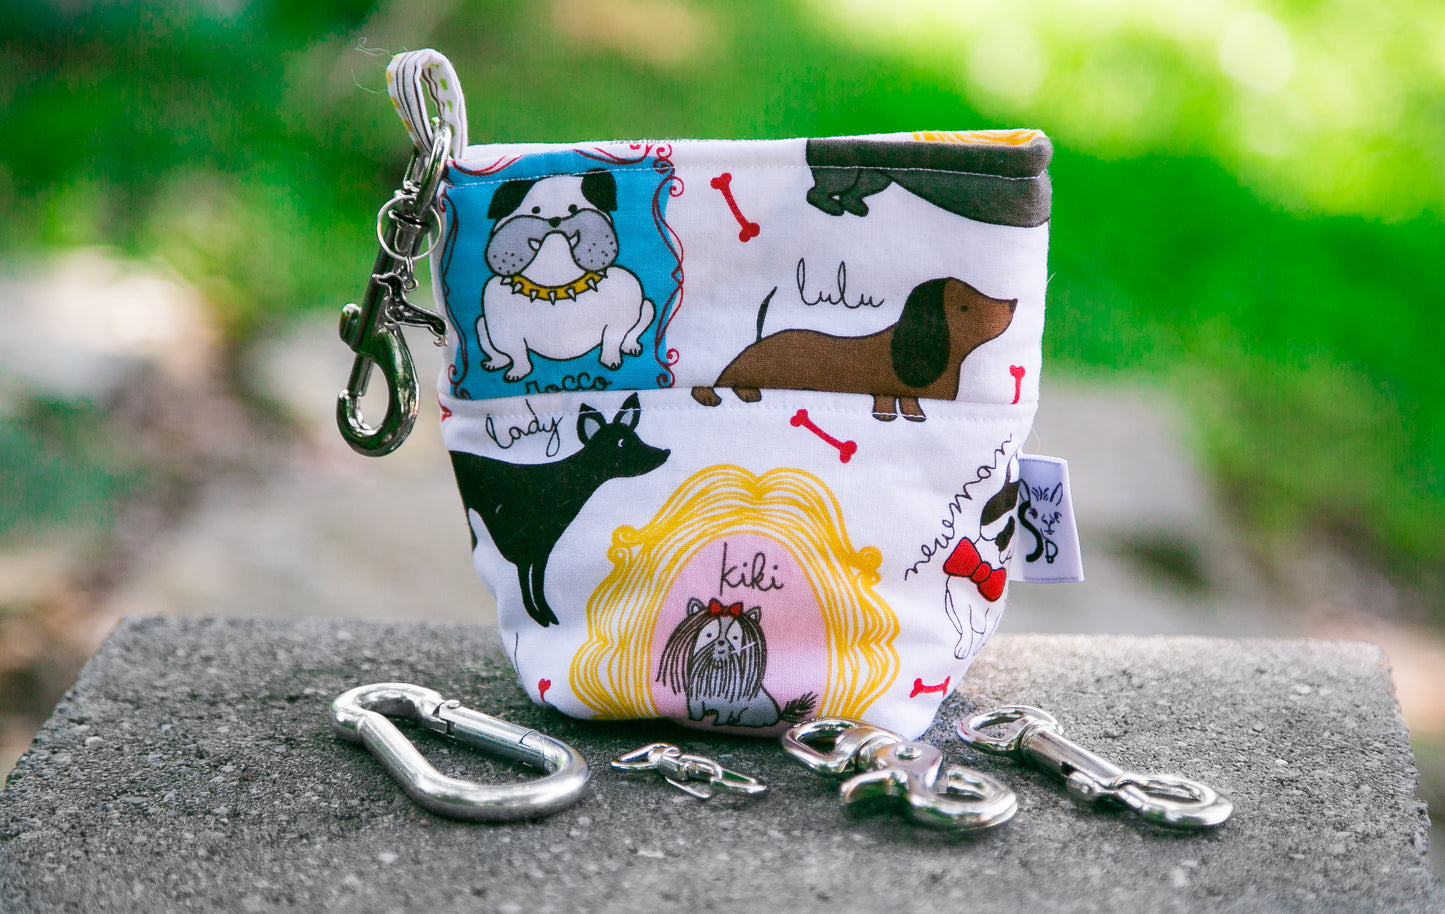 Fun Premium Treat and Pickup Bags Carry Pouch Food Safe Waterproof Lining Choice of Clasps Hipsta Dawg Hipster Dog